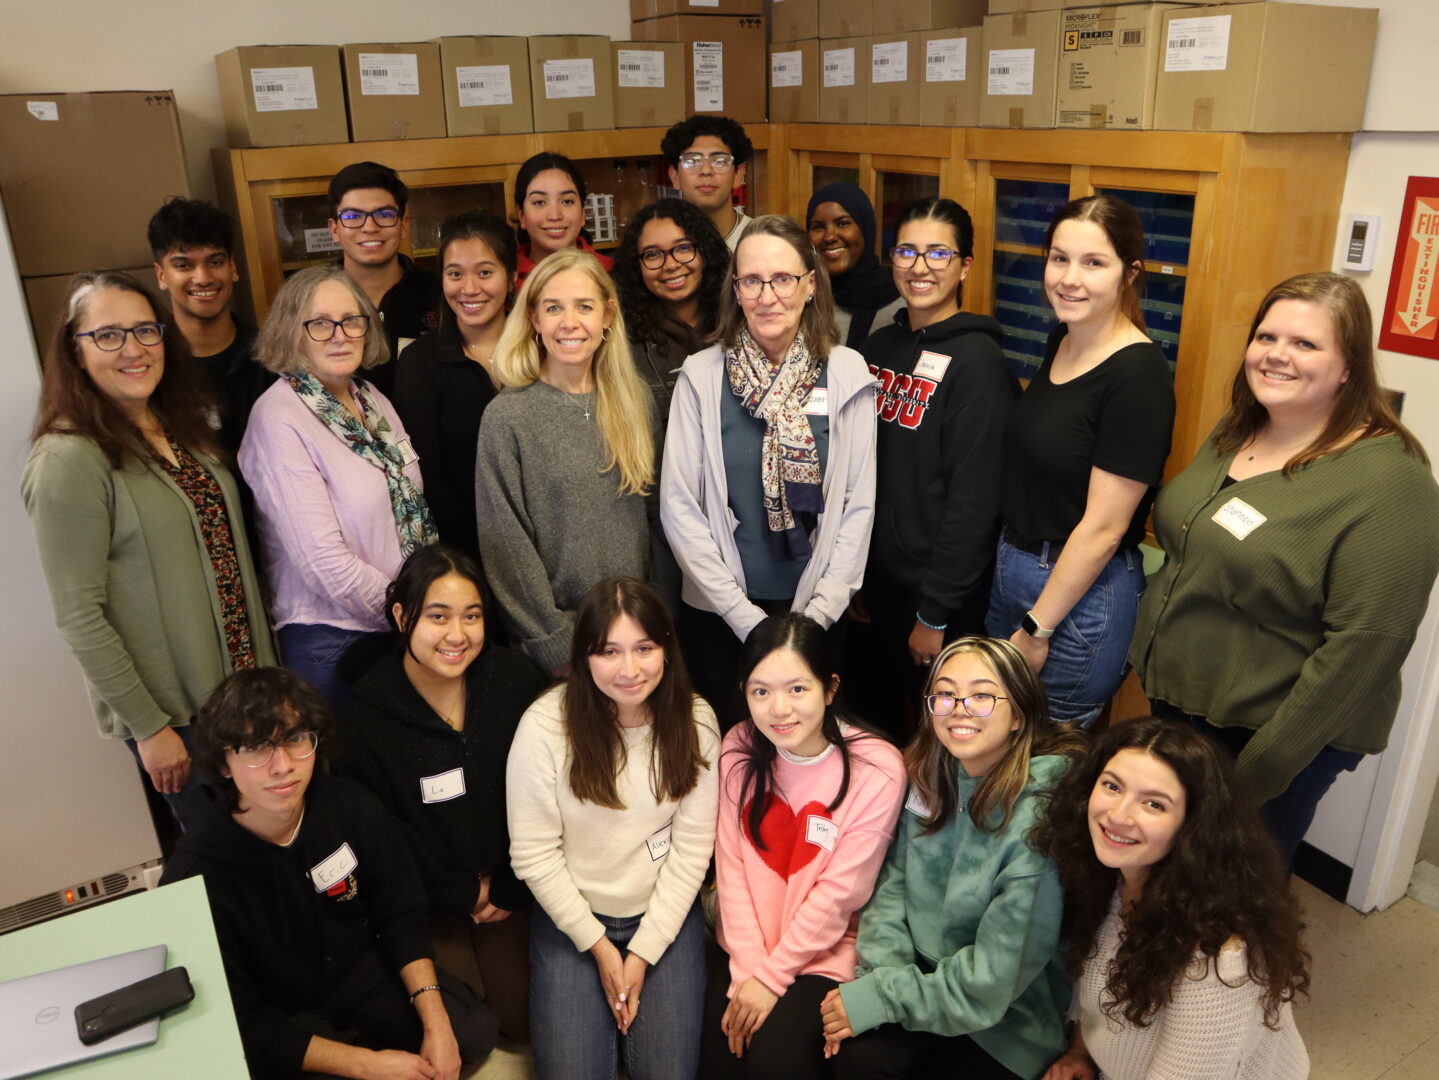 The four principal investigators who manage the Biotech Scholars program pose for a photo in the lab with their cohort of fourteen undergraduate students